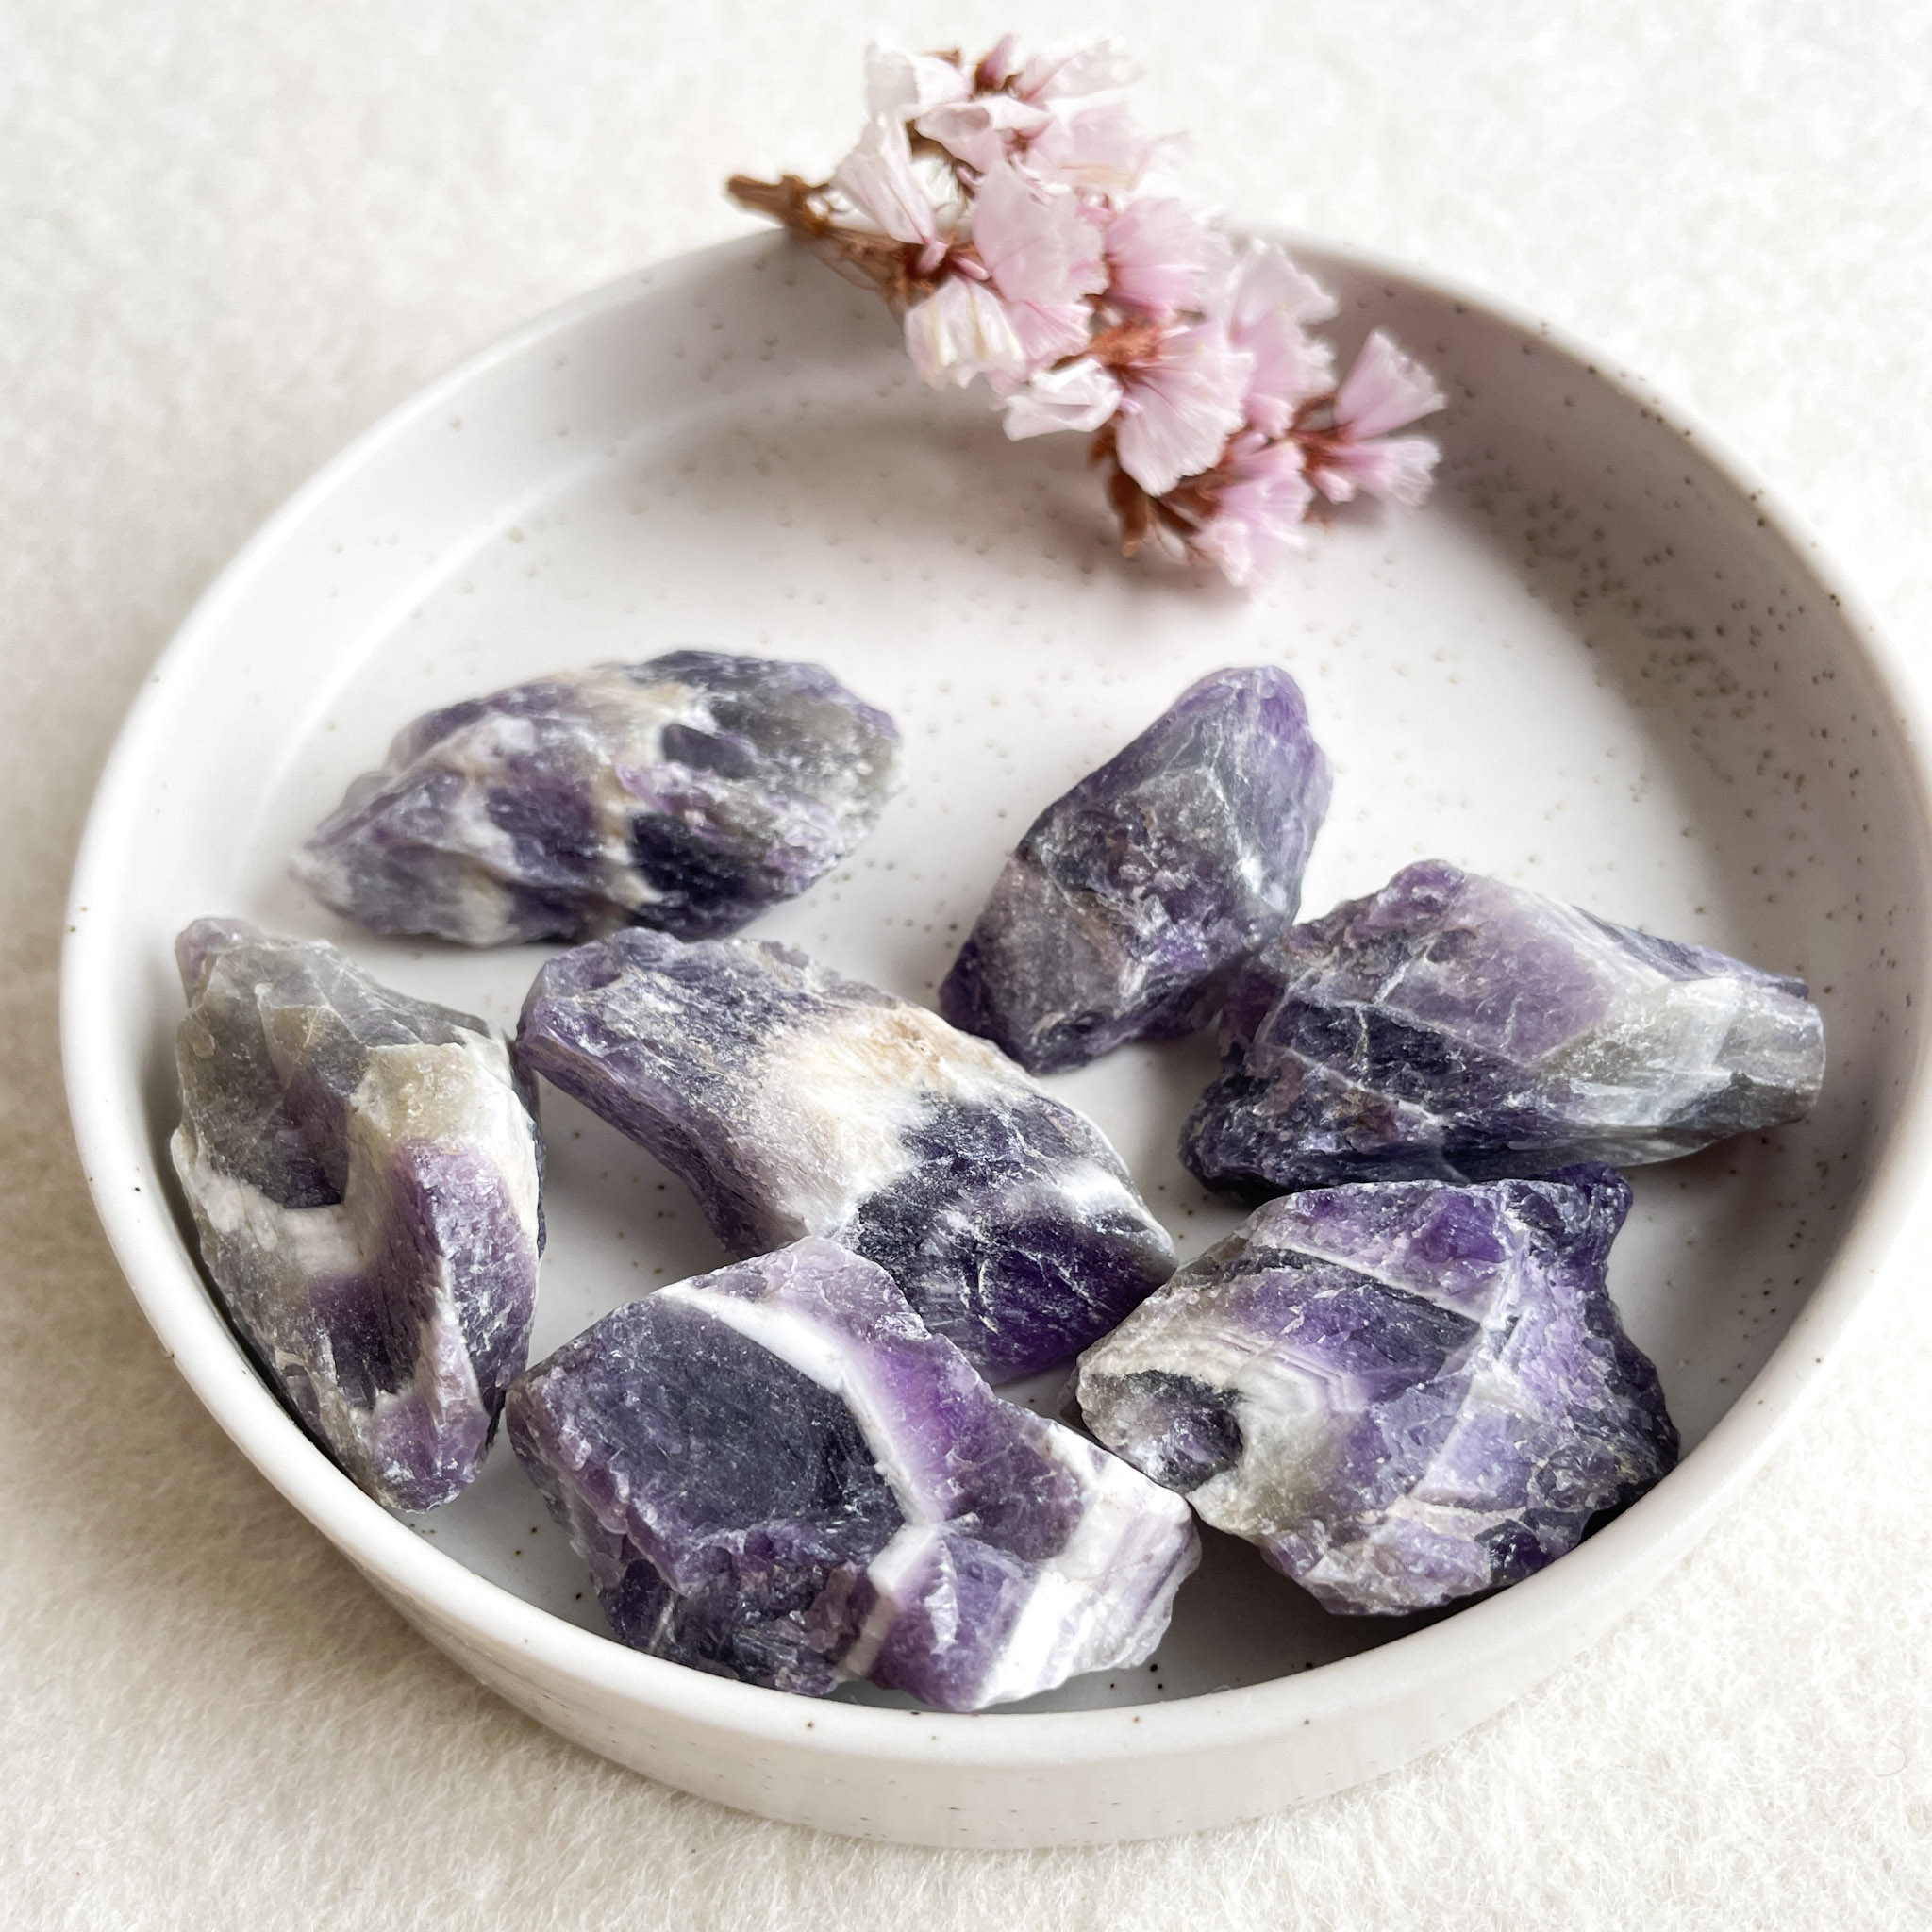 A white ceramic bowl containing rough amethyst crystals and a small cluster of pink flowers on a textured beige surface.